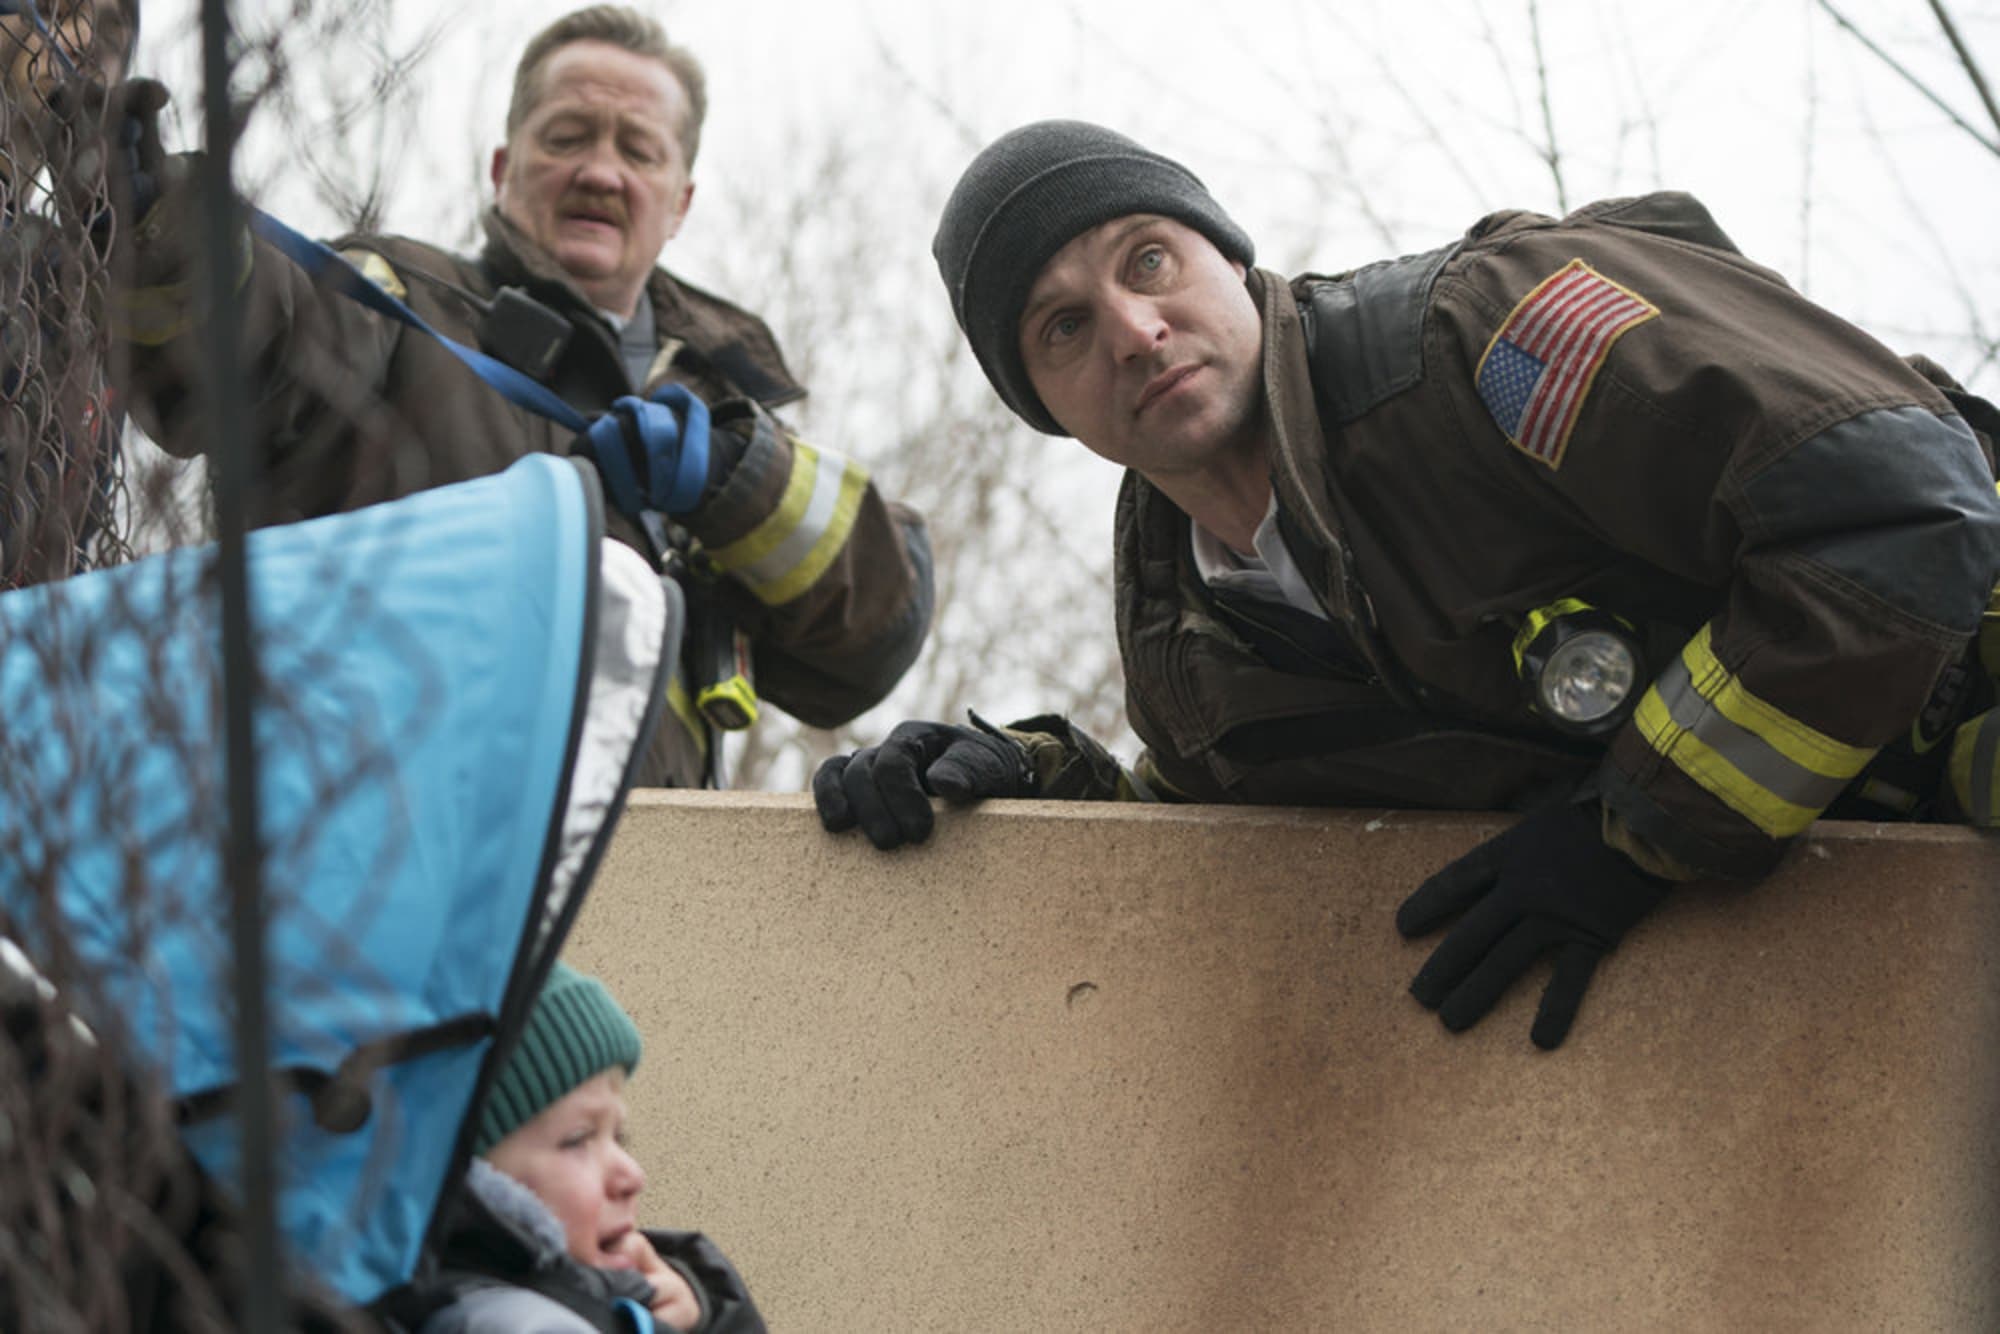 Chicago Fire Season 6, Episode 19 live stream Watch for